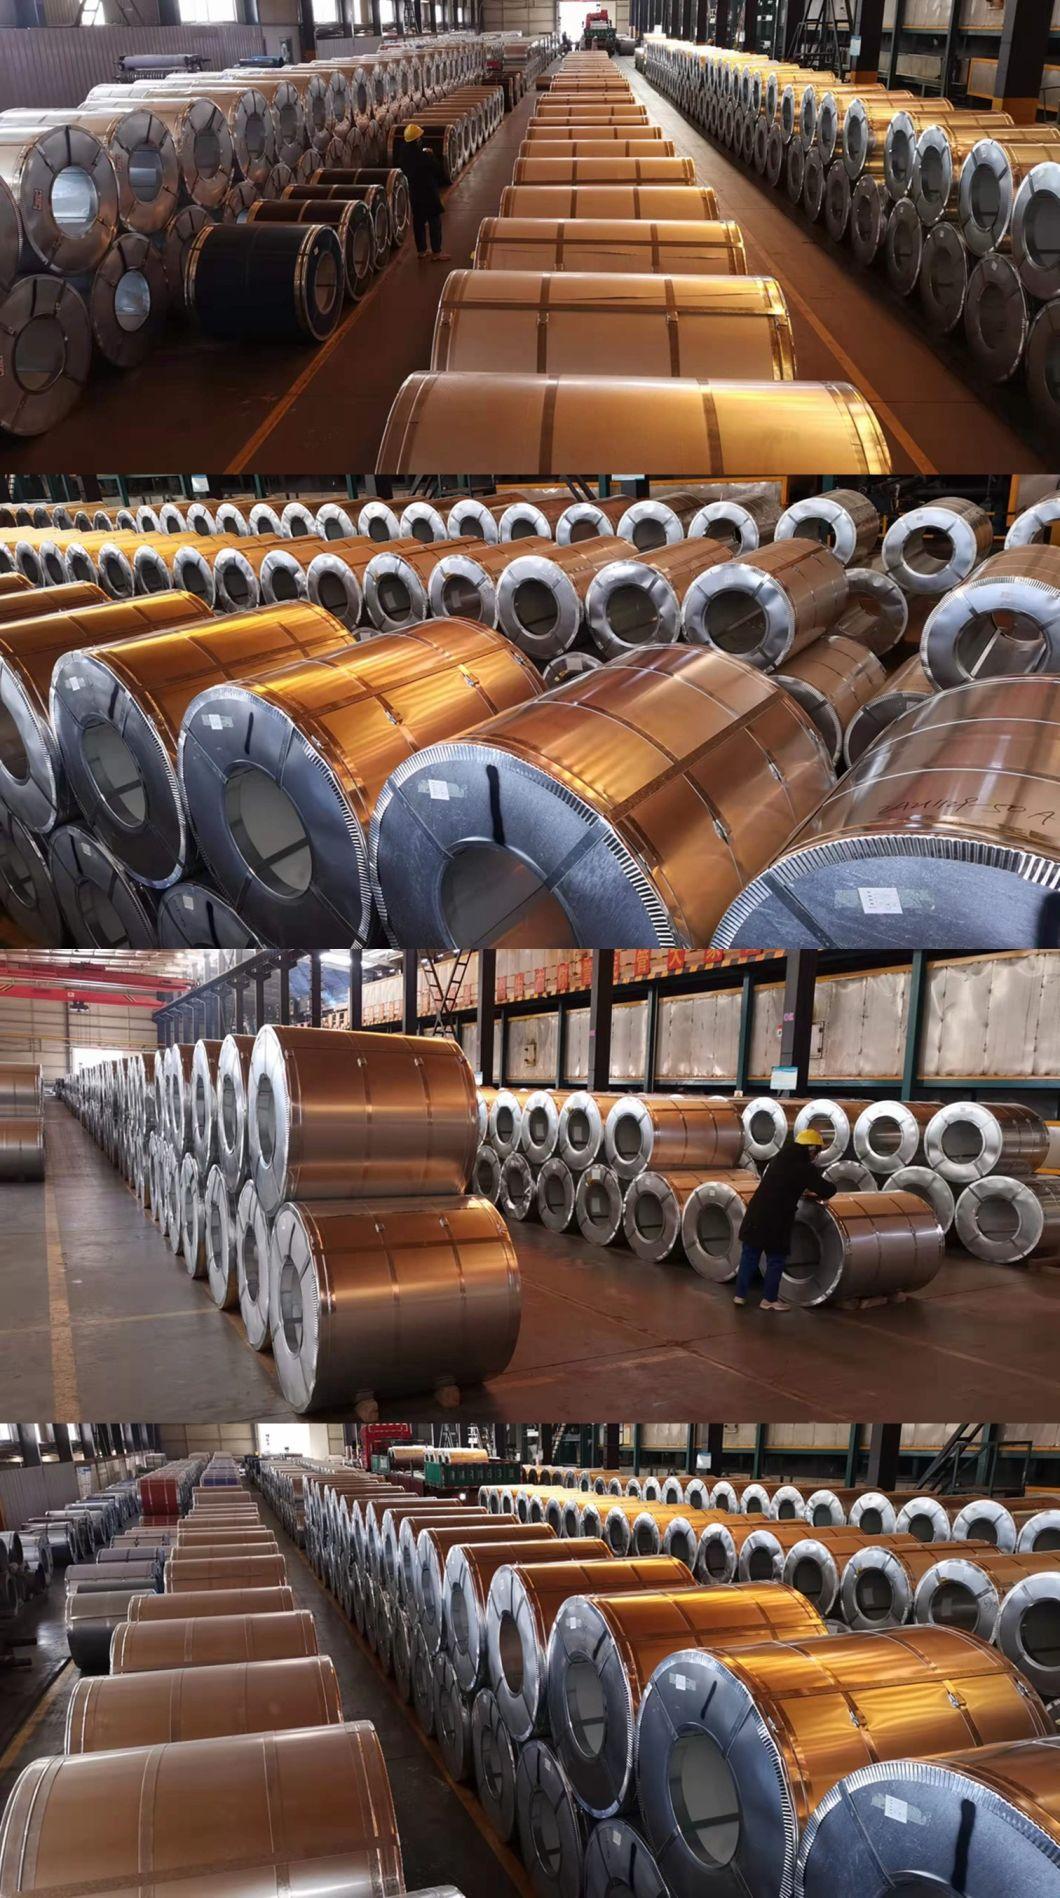 ASTM Chinese Manufacturers Low Building Material Carbon Steel Wire in China Rod